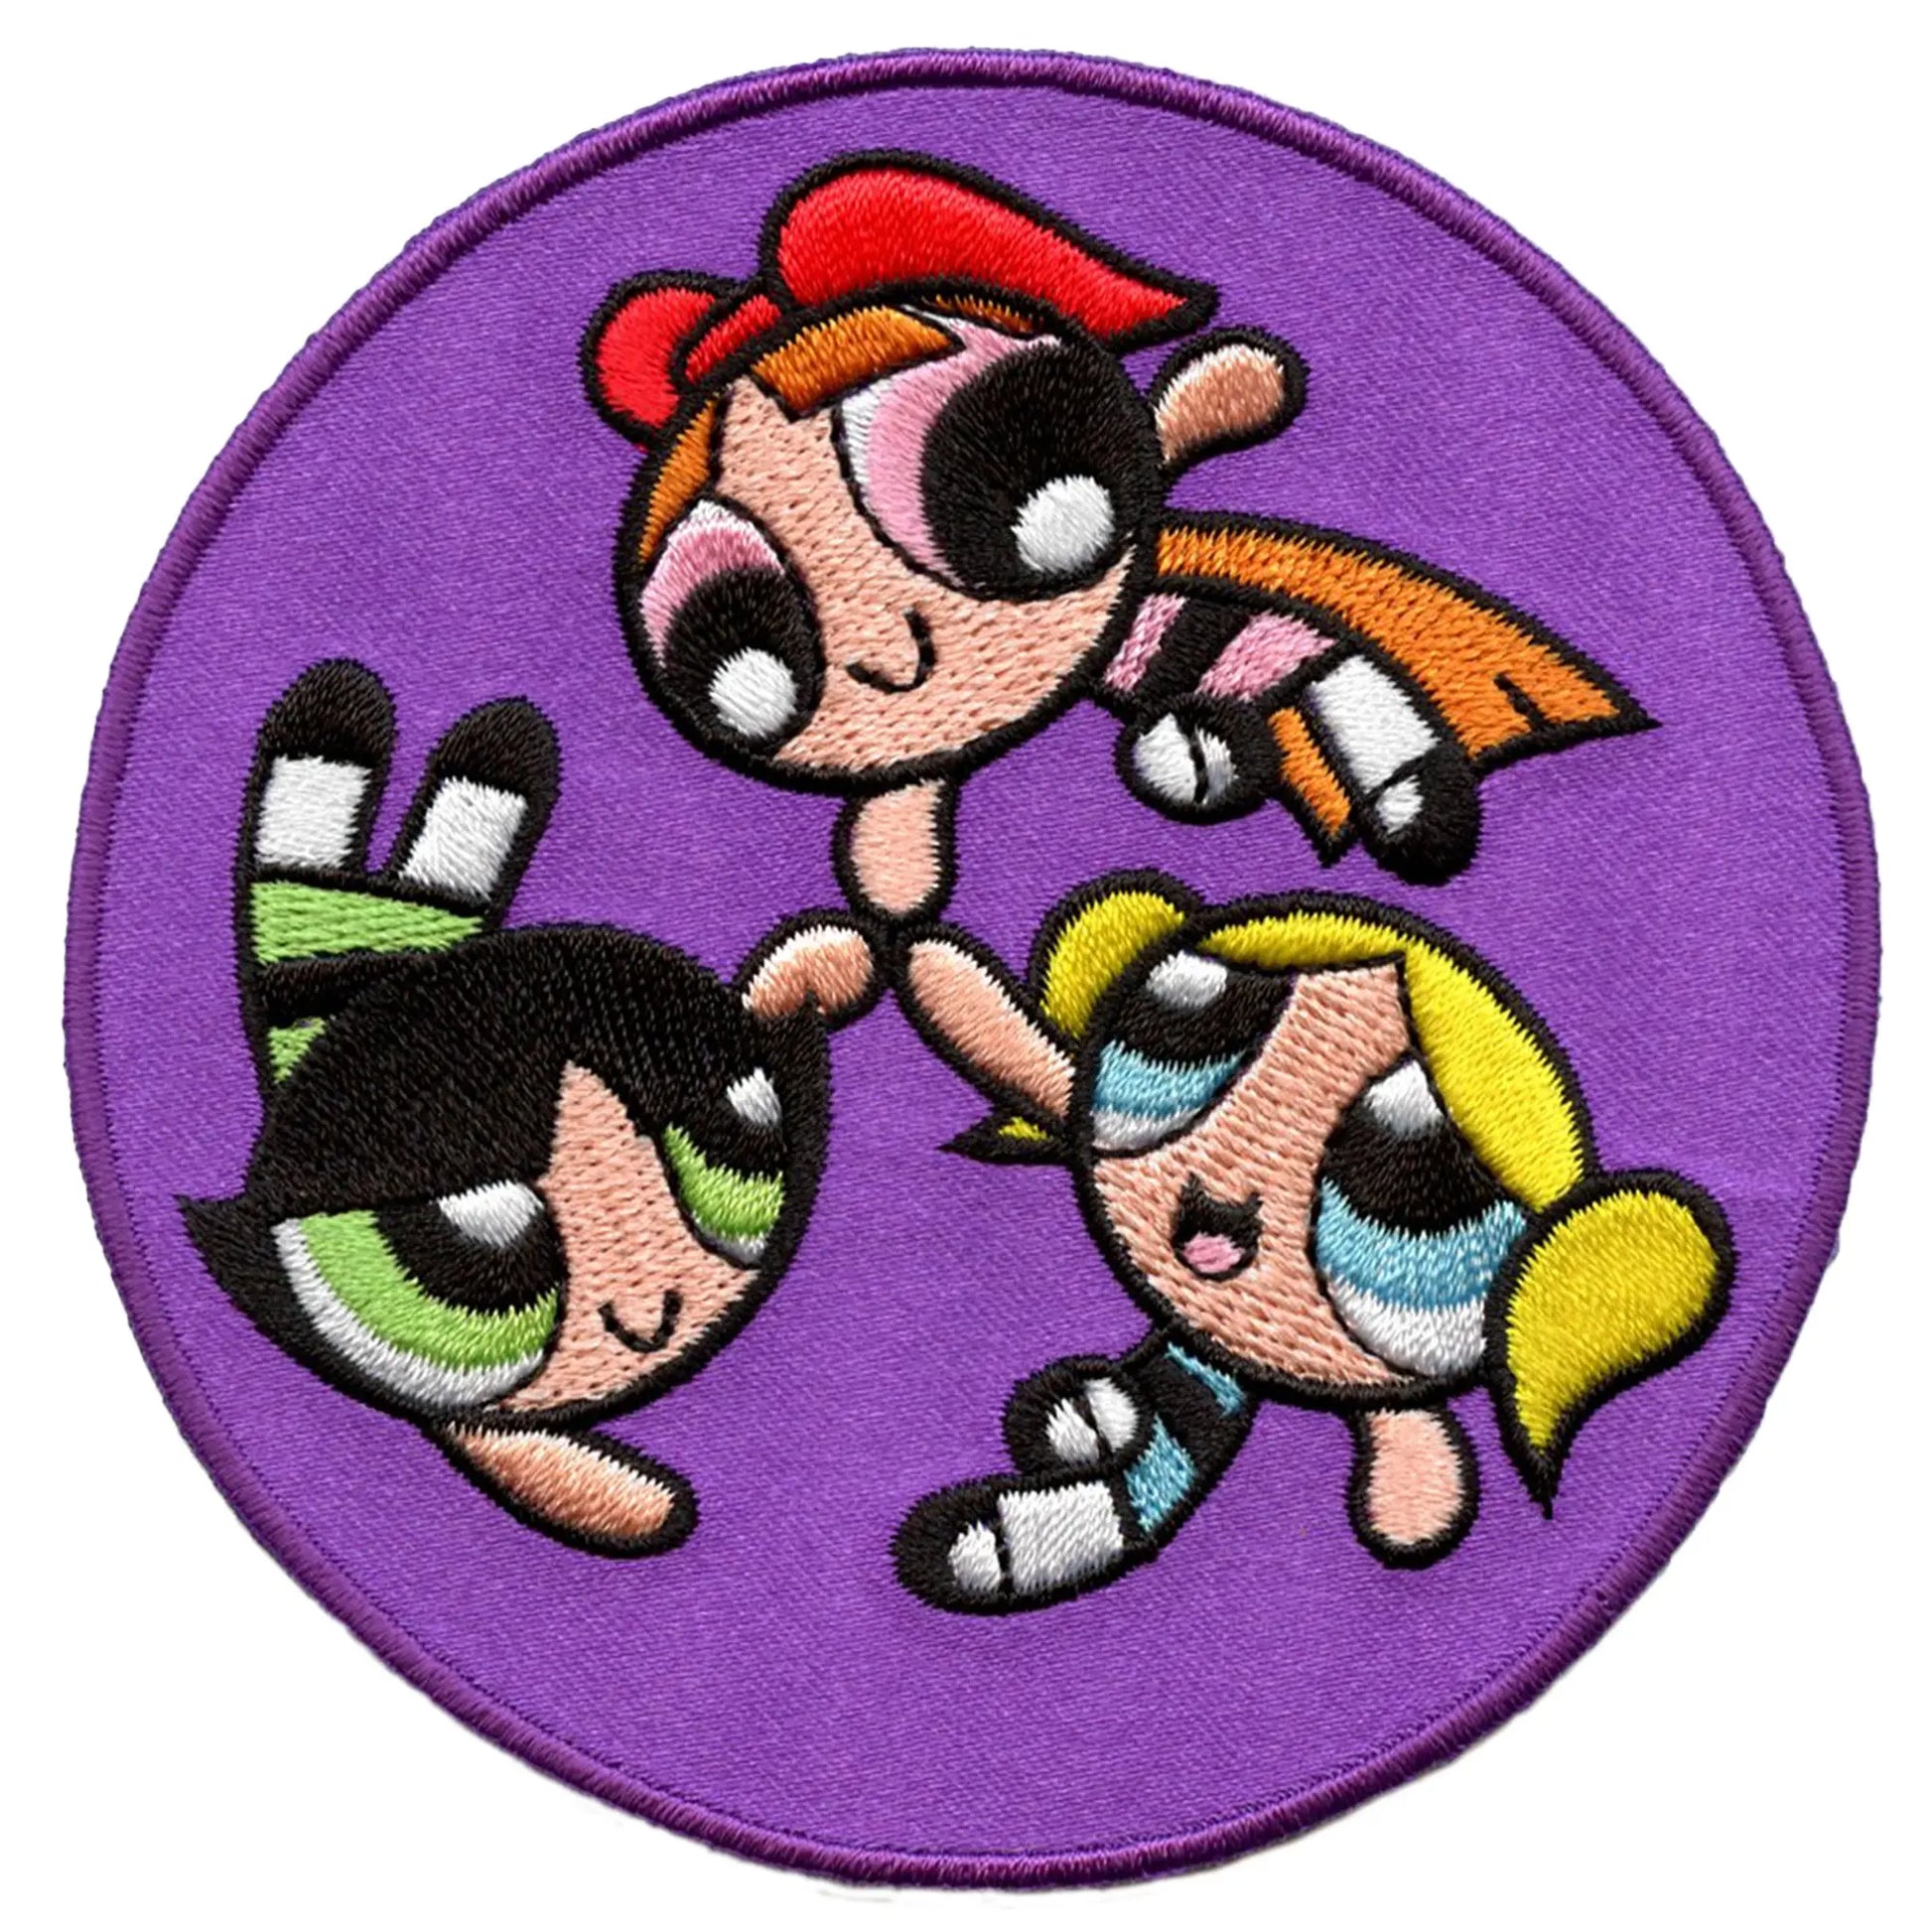 Powerpuff Girls Flying High Five Patch Cartoon Network Animation Embroidered Iron On